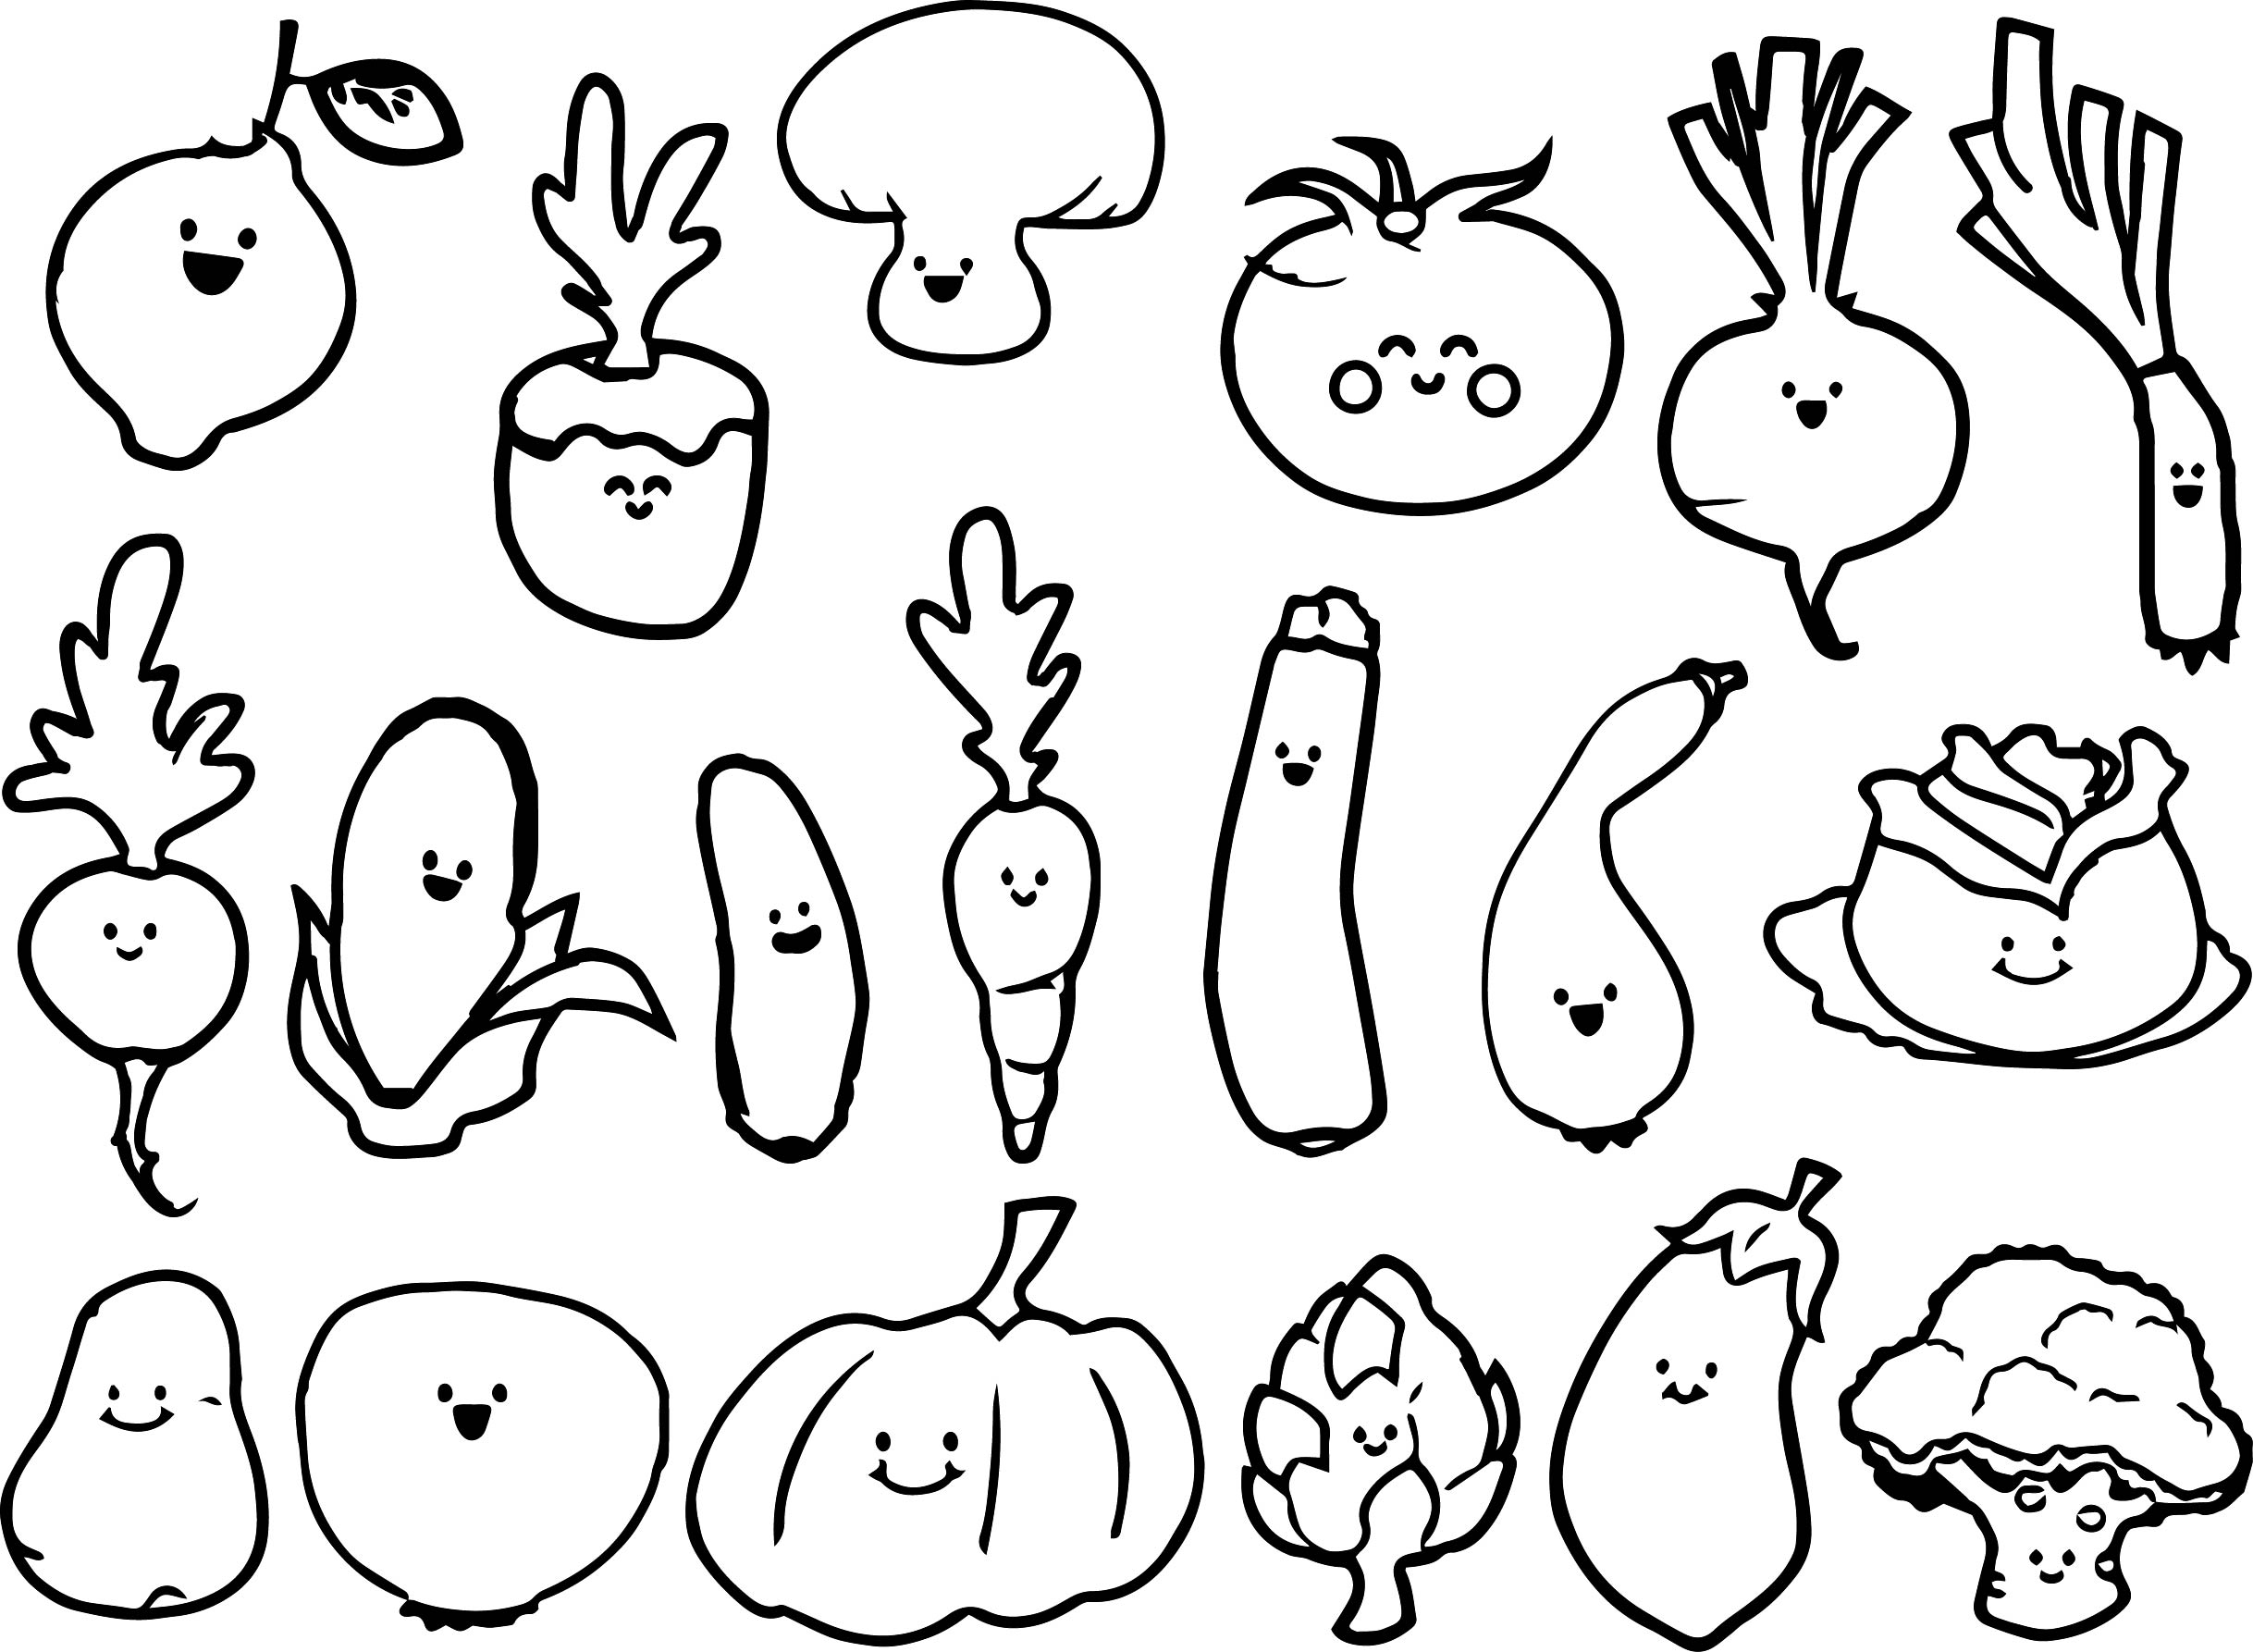 Free Fun Vegetables Coloring Page